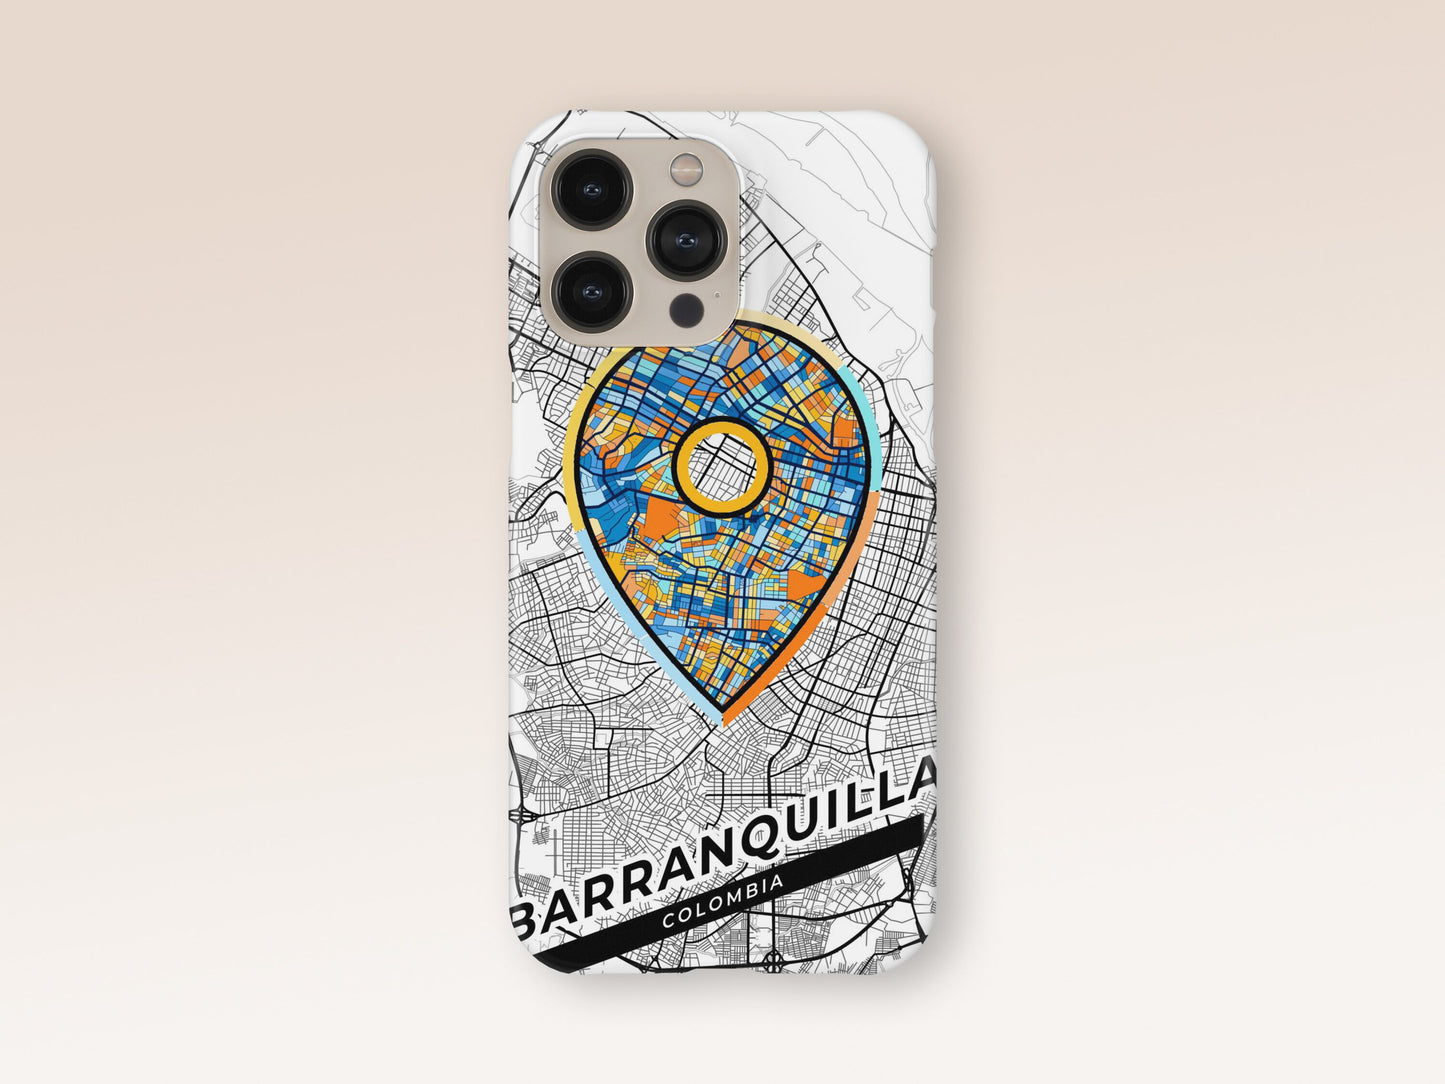 Barranquilla Colombia slim phone case with colorful icon. Birthday, wedding or housewarming gift. Couple match cases. 1